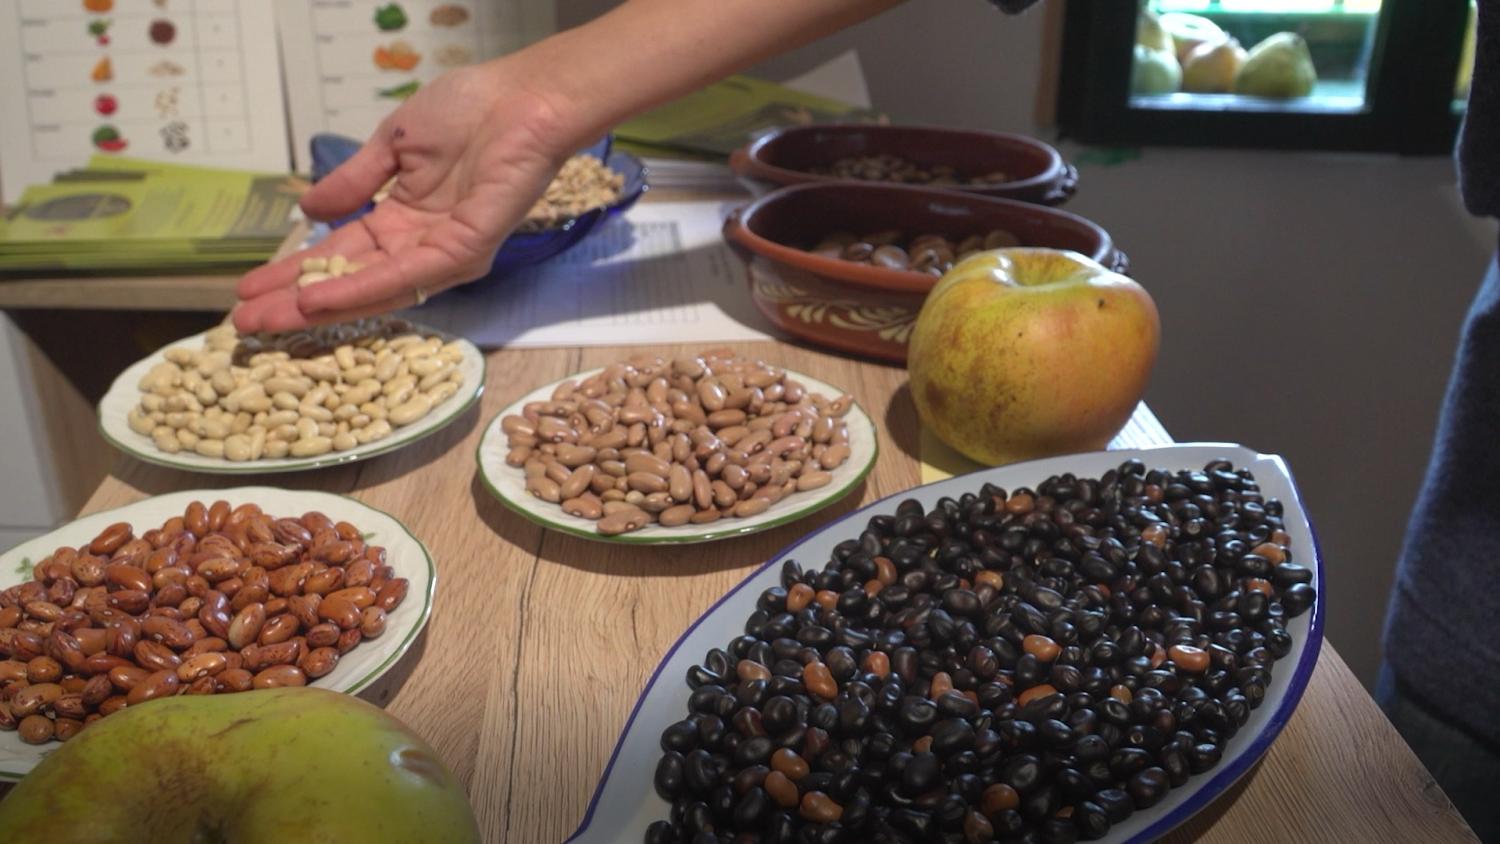 The Seed Bank, a Local Works partner, displays the indigenous seeds they preserve